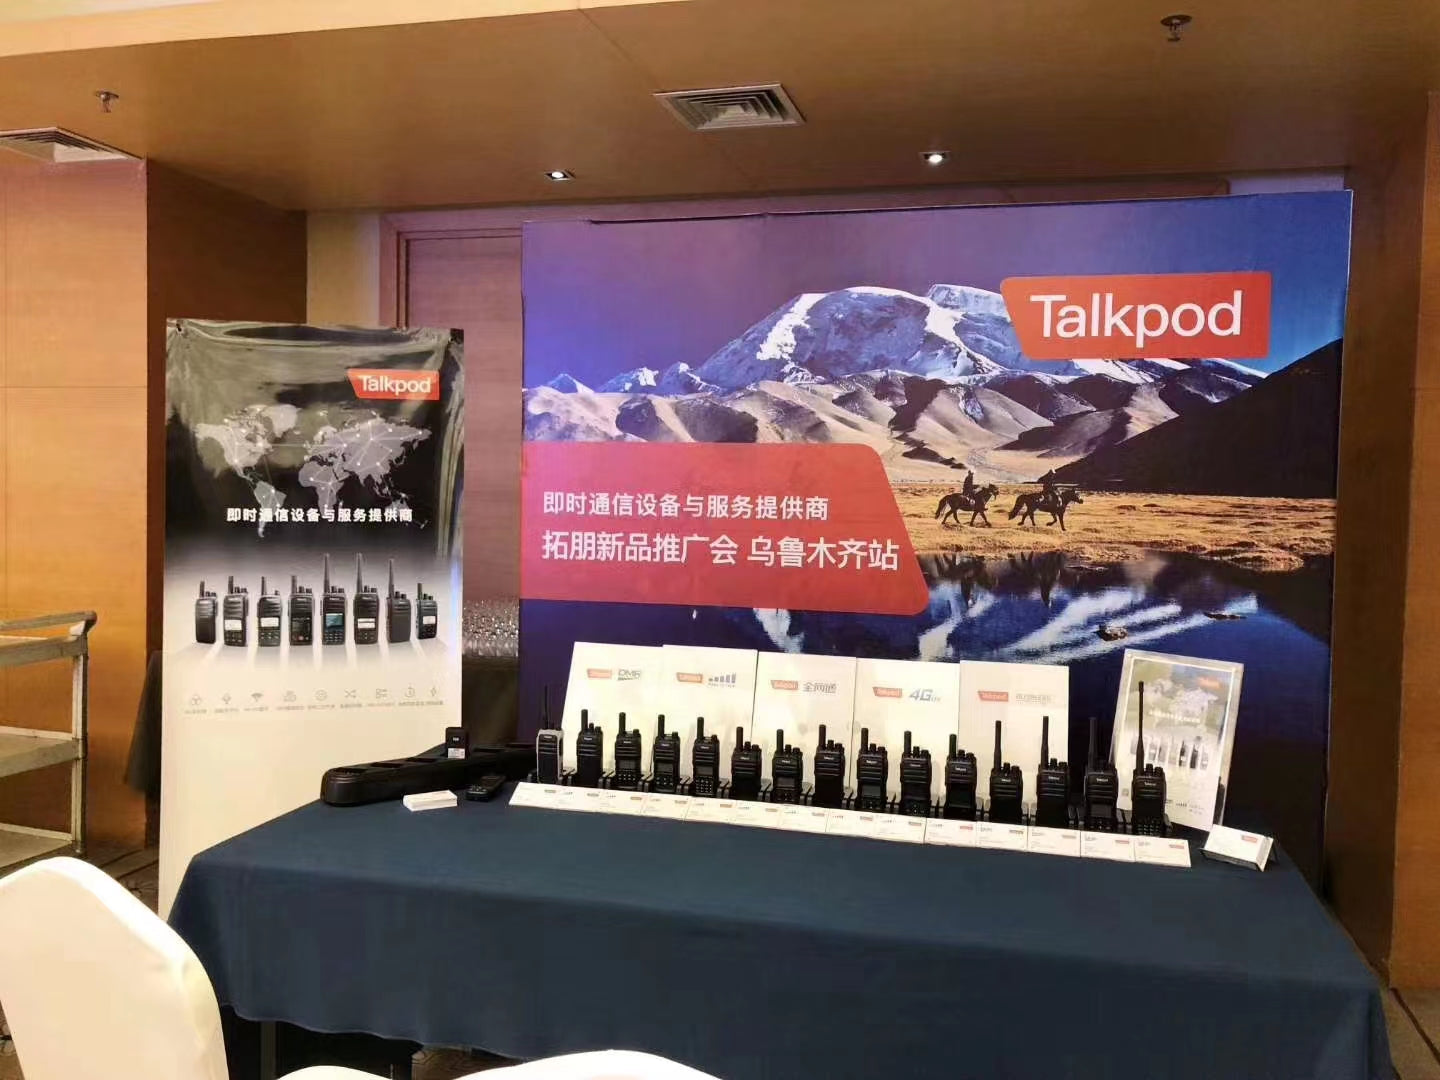 Talkpod's Product Launch Event Successfully Held in Xinjiang, China!